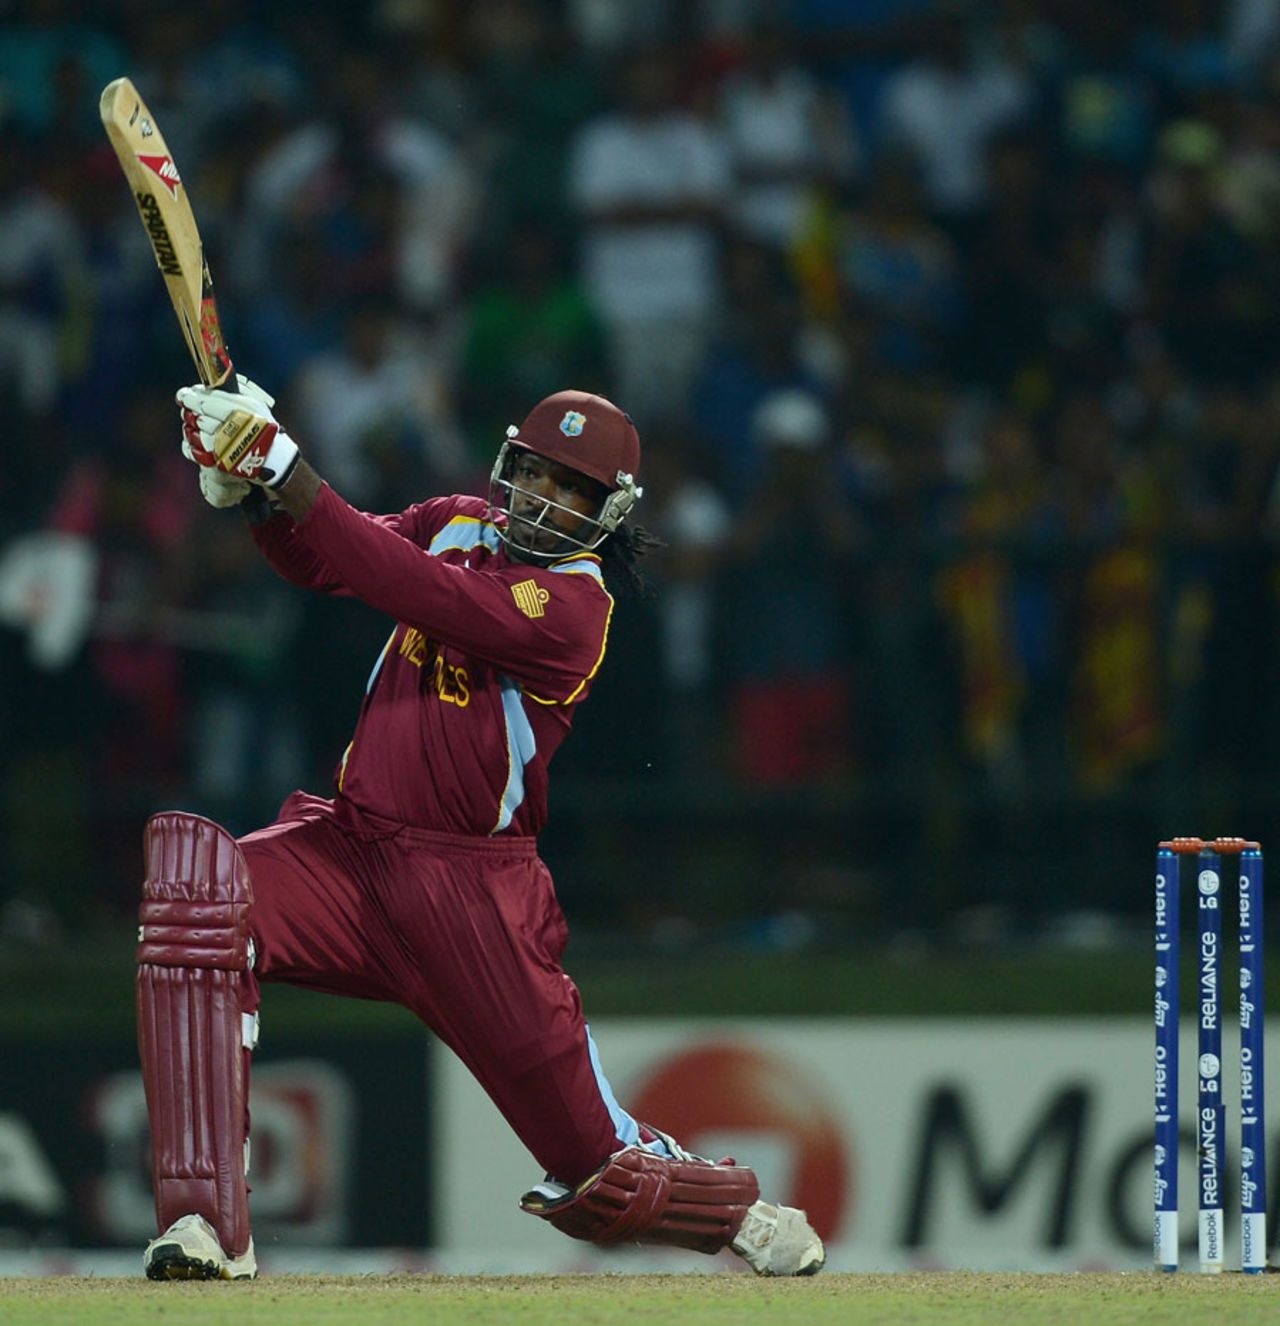 Chris Gayle launched a six off the first ball of the Super Over, New Zealand v West Indies, Super Eights, World Twenty20 2012, Pallekele, October 1, 2012